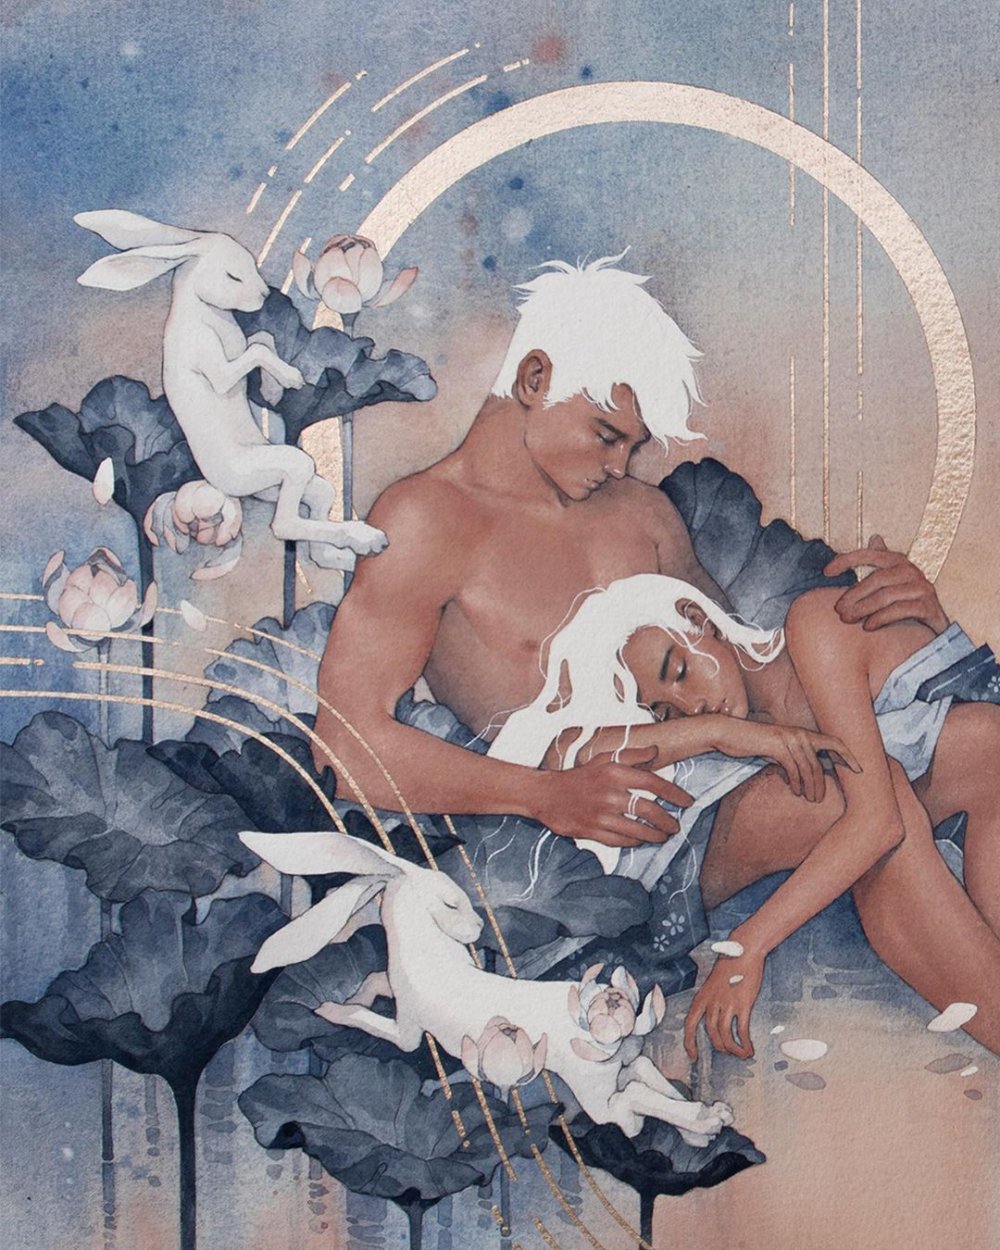 Whimsical And Ethereal Watercolors Of Women In Deep Moments Of Intimacy By Hieu Nguyen 6